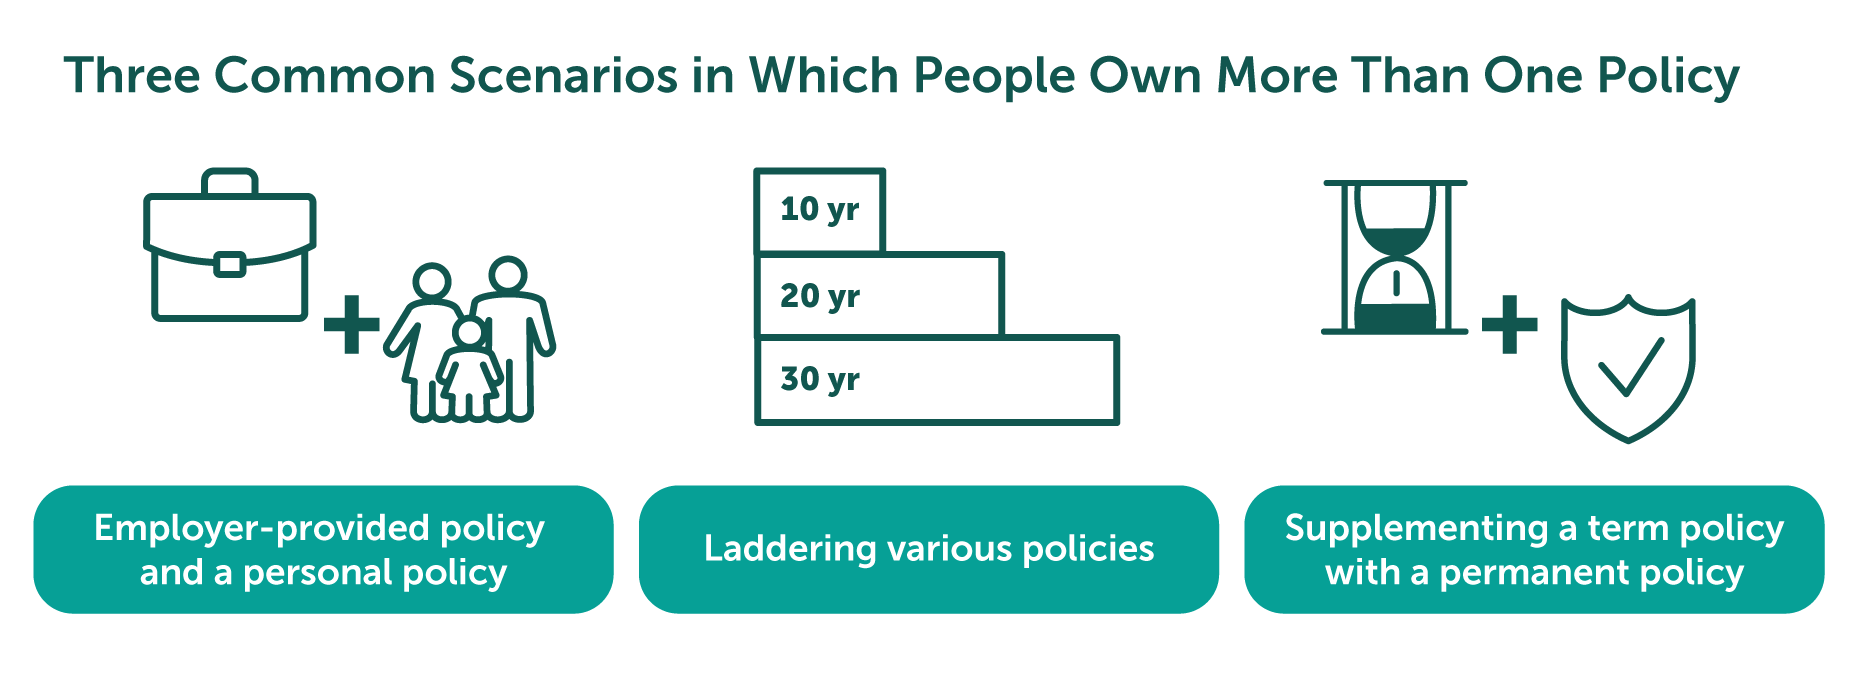 Graphic showing icons that represent the 3 common scenarios in which people own more than one policy; employer-provided and personal, laddering, and supplementing a term with a permanent.